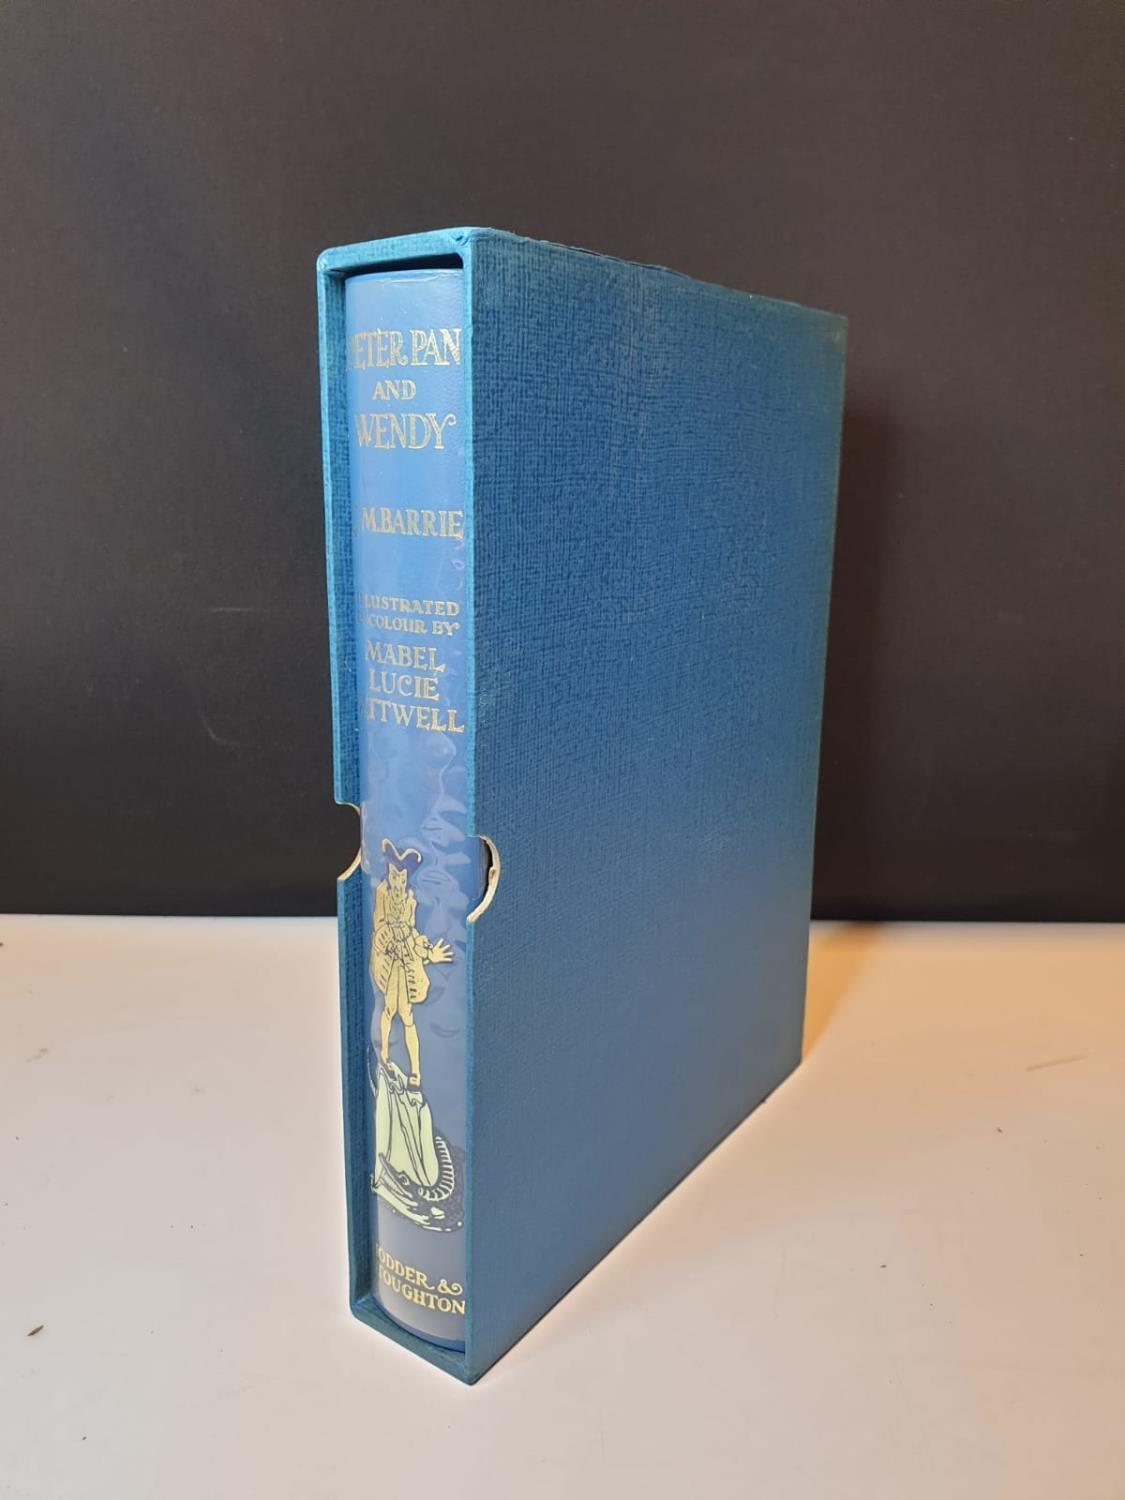 A boxed limited edition of 'Peter Pan and Wendy' by J.M Barrie no 96 of 500 never read, bound in - Image 5 of 18